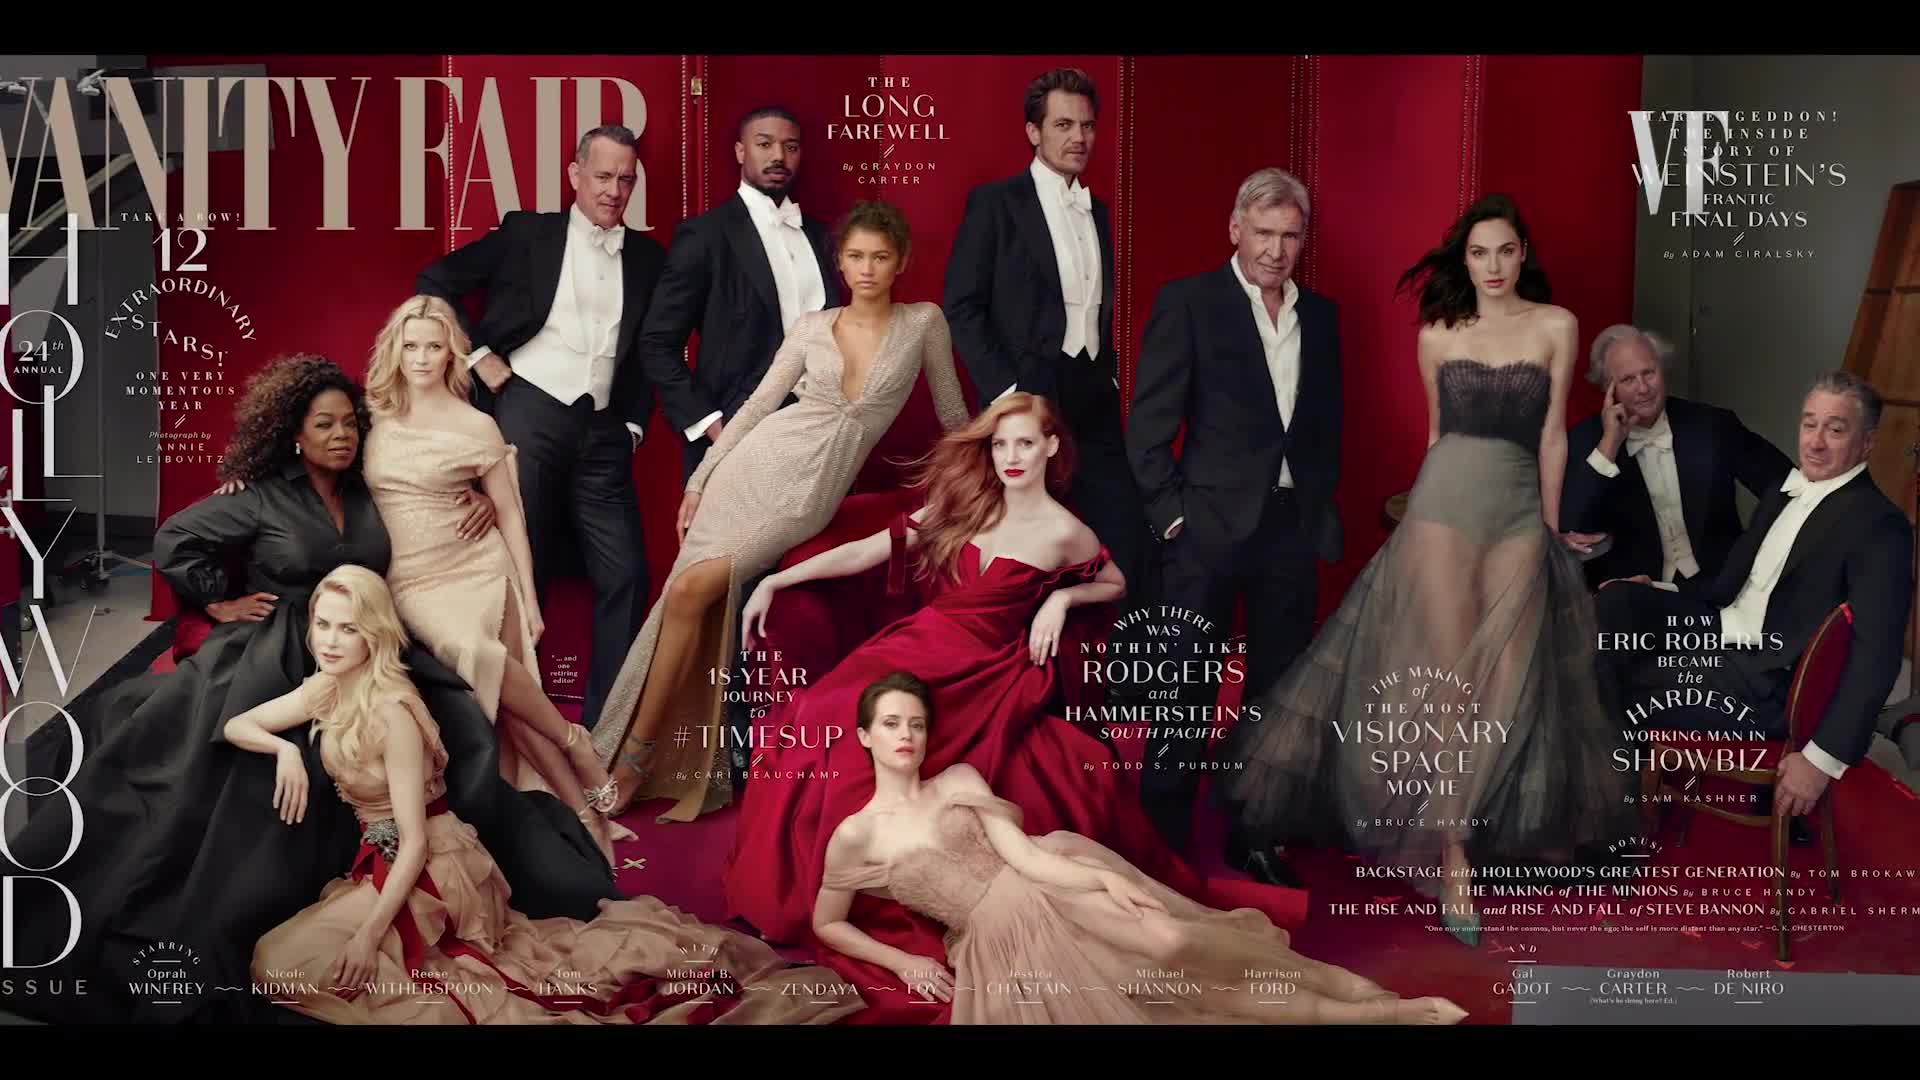 Watch Behind the Scenes of Vanity Fair's 2018 Hollywood Issue The